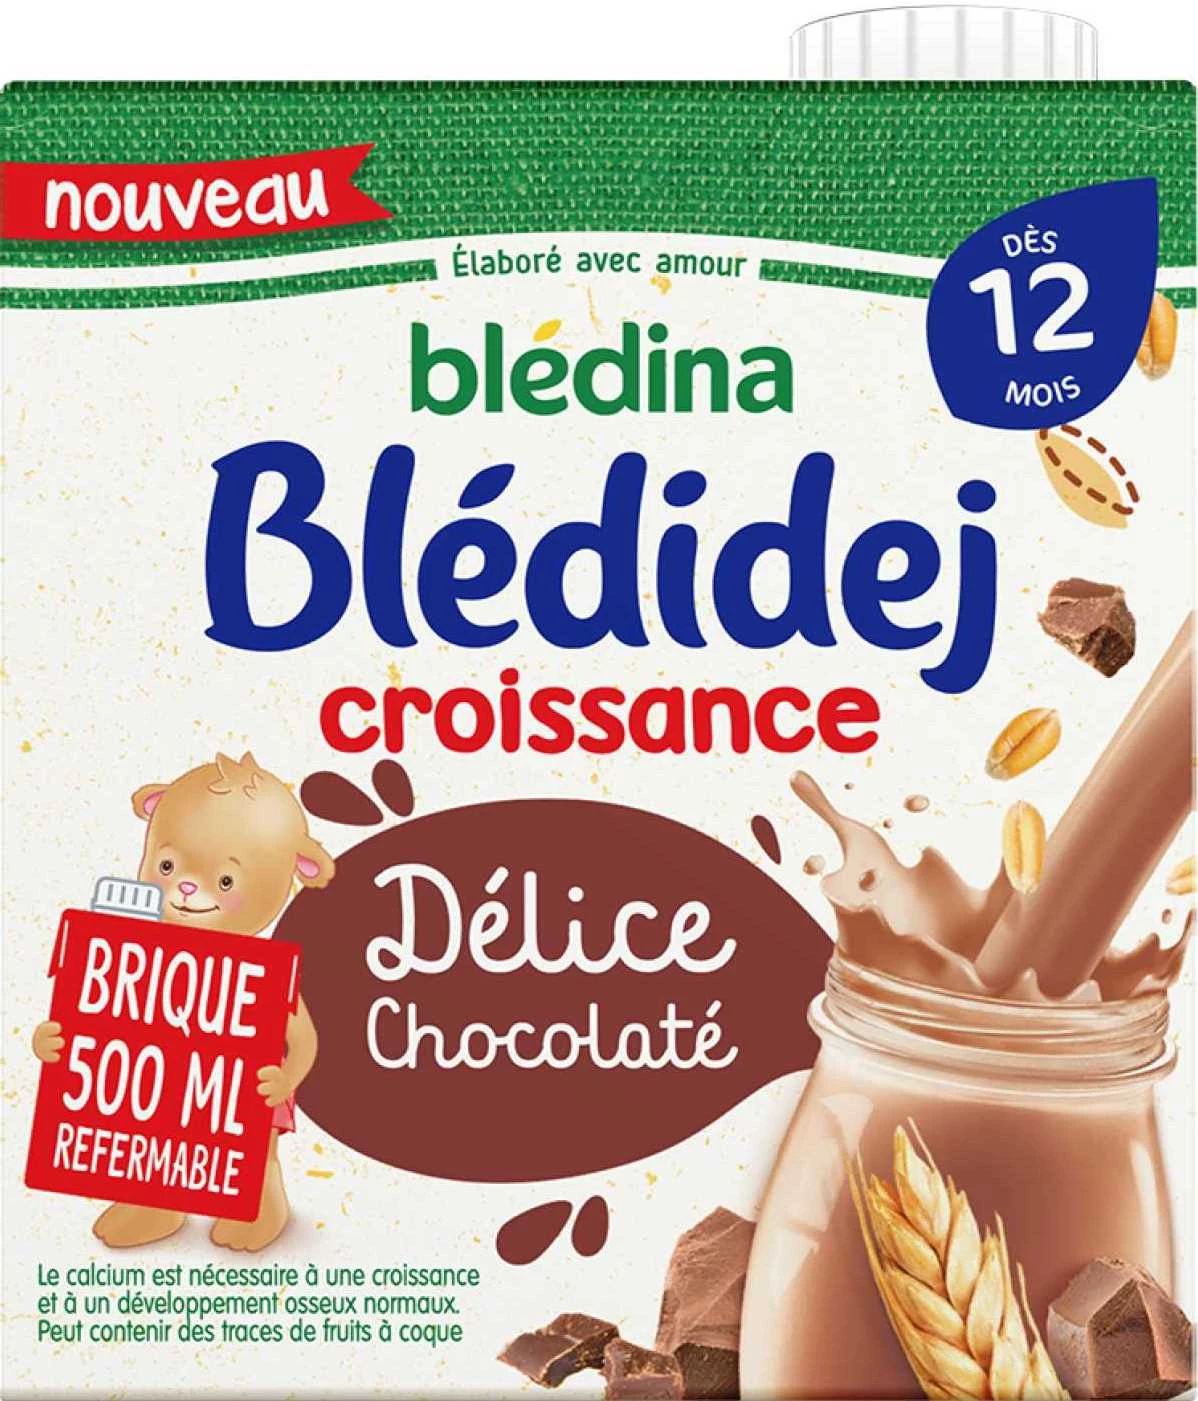 Bledidej Growth Chocolate Biscuit Delicious - BLEDINA